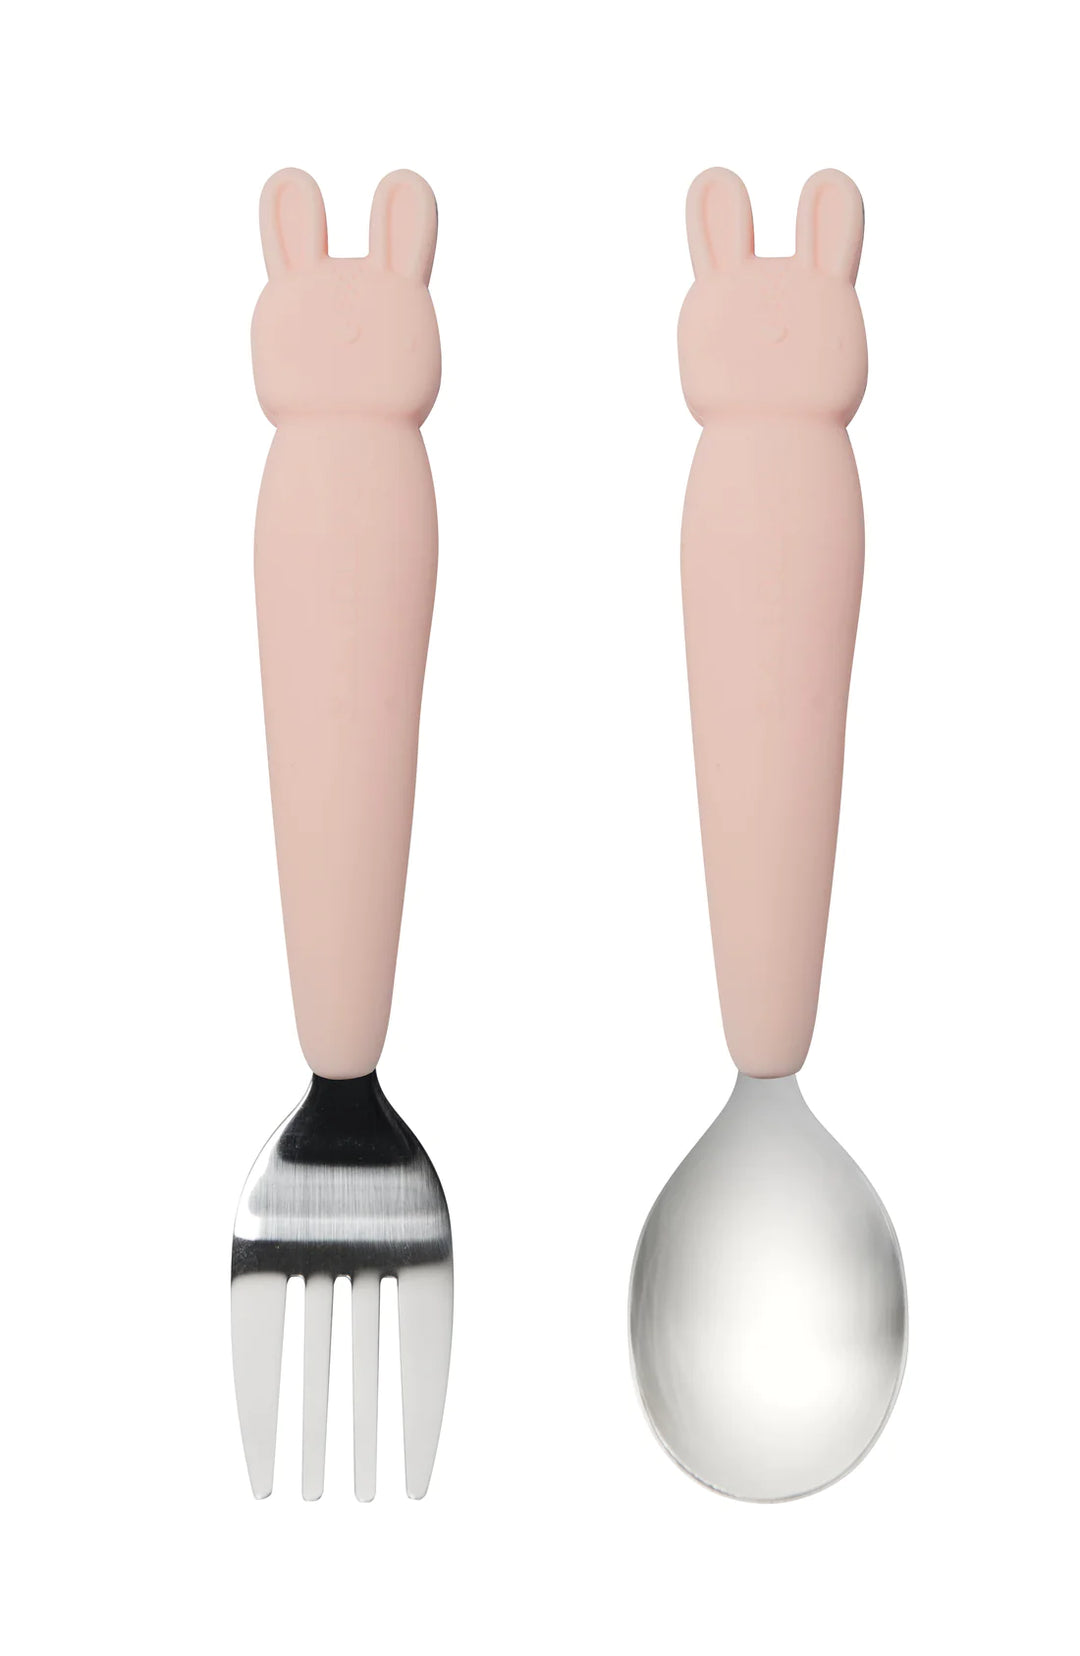 Bunny Kids Spoon and Fork Set by Loulou Lollipop